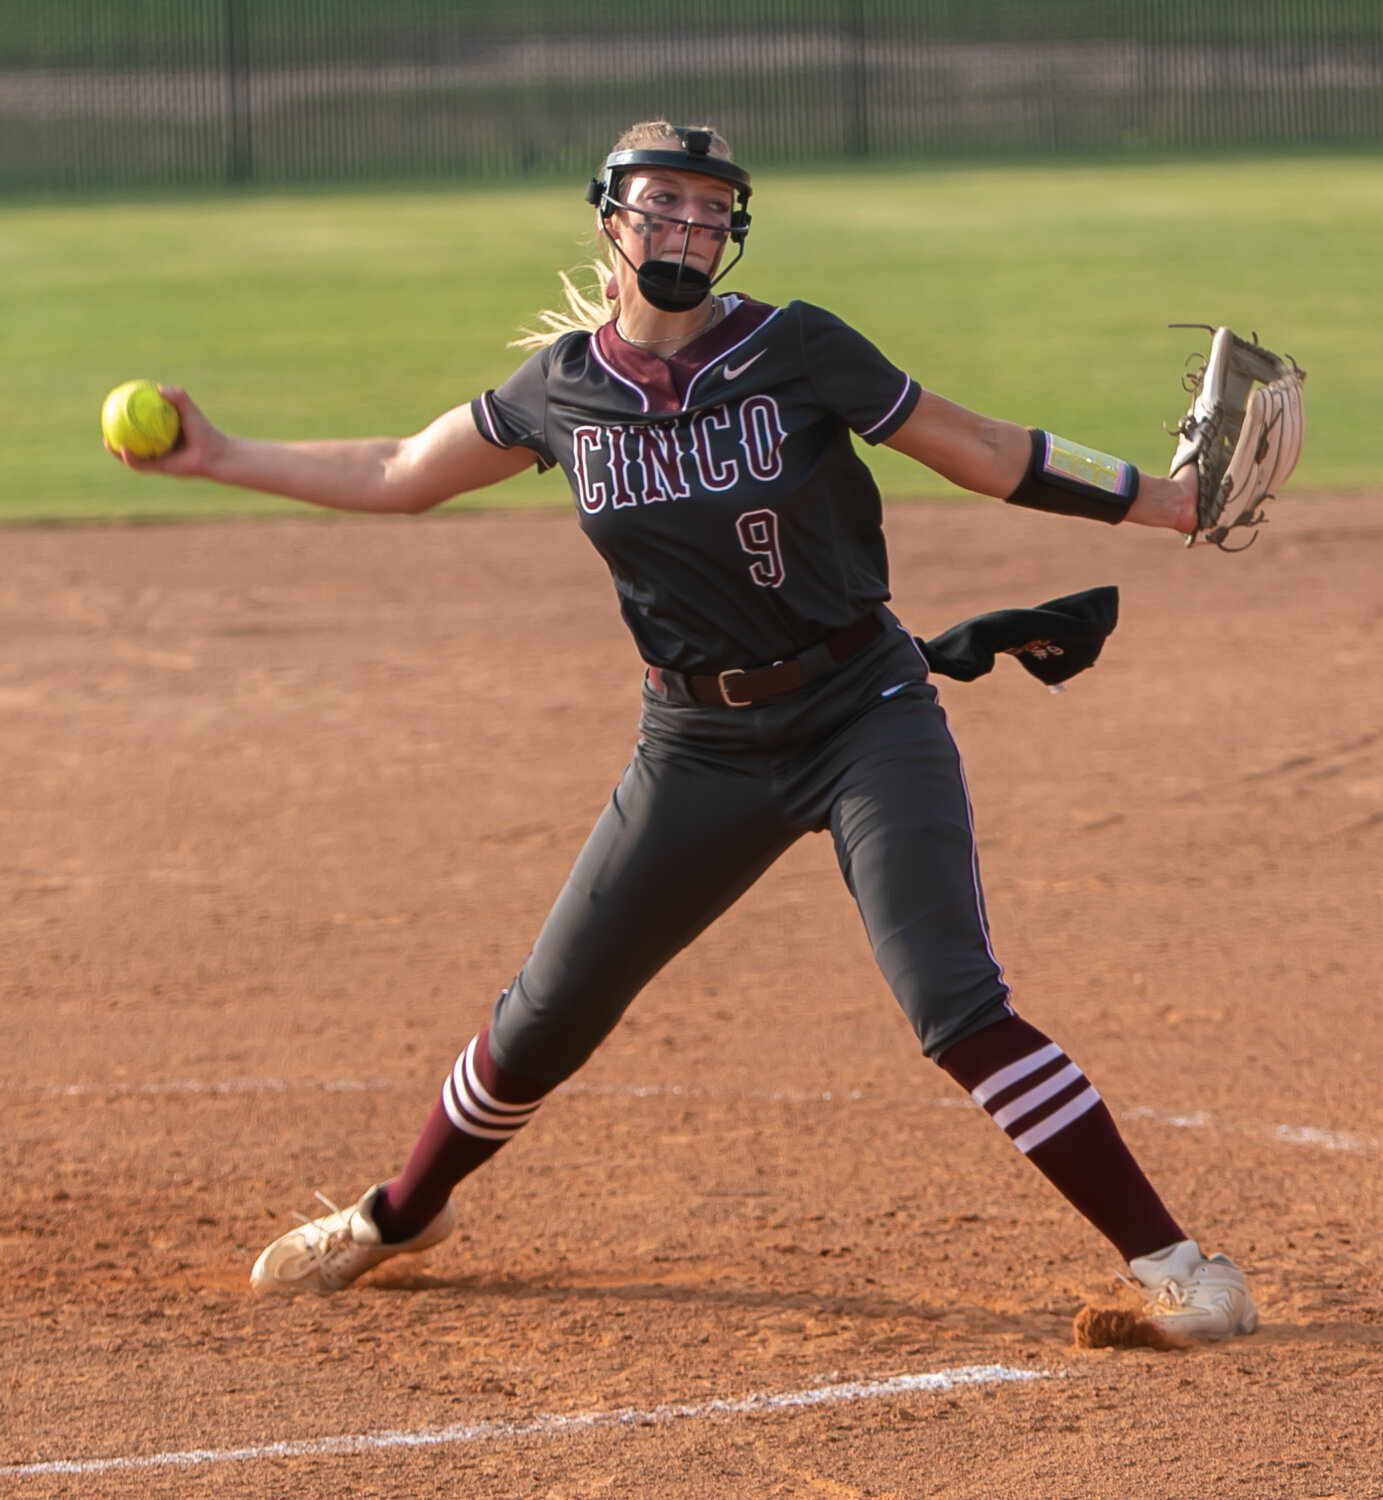 Chela Kovar pitches during Friday's area round game between Cinco Ranch and Heights at the Cinco Ranch softball field.